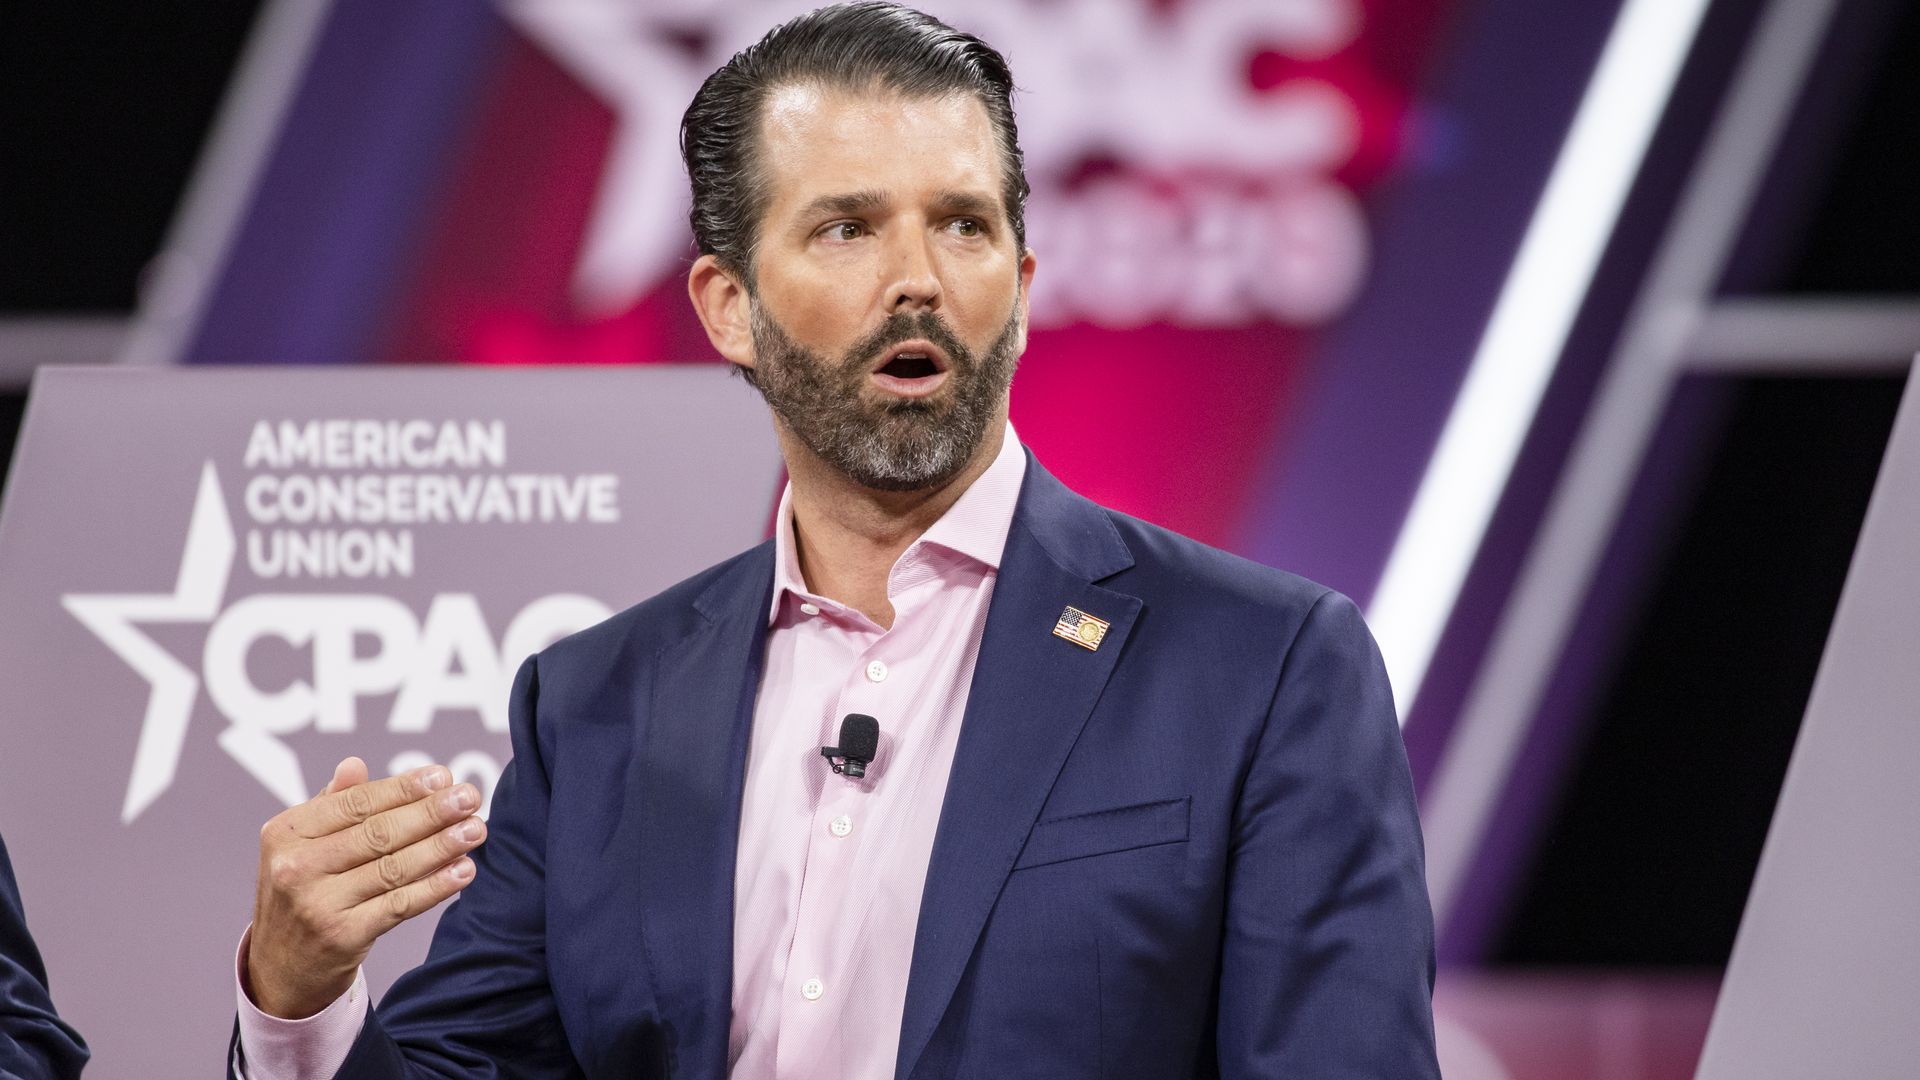 Donald Trump Jr. speaking at CPAC in February 2020.